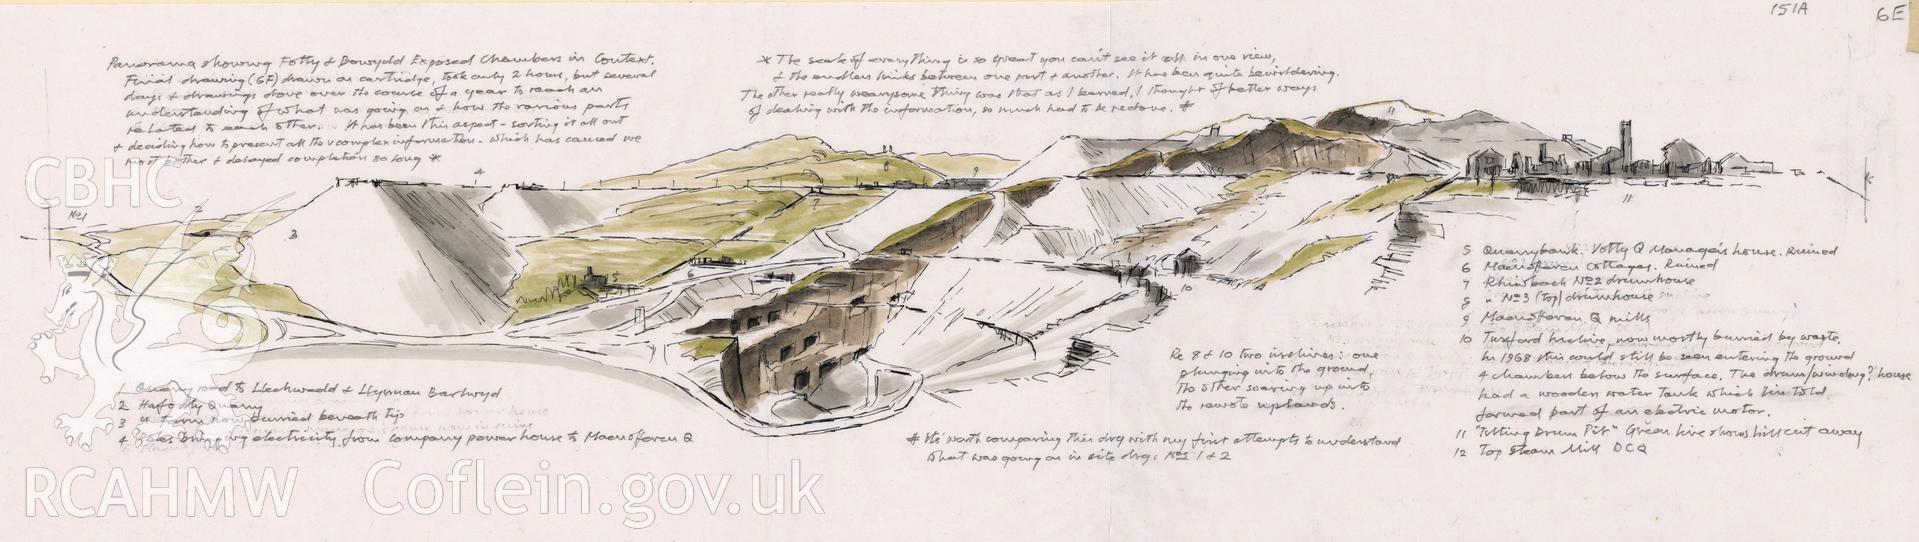 Exposed Chambers in Context of Landscape - Foty & Bowydd Quarry: (pencil, ink and watercolour) preliminary drawing.